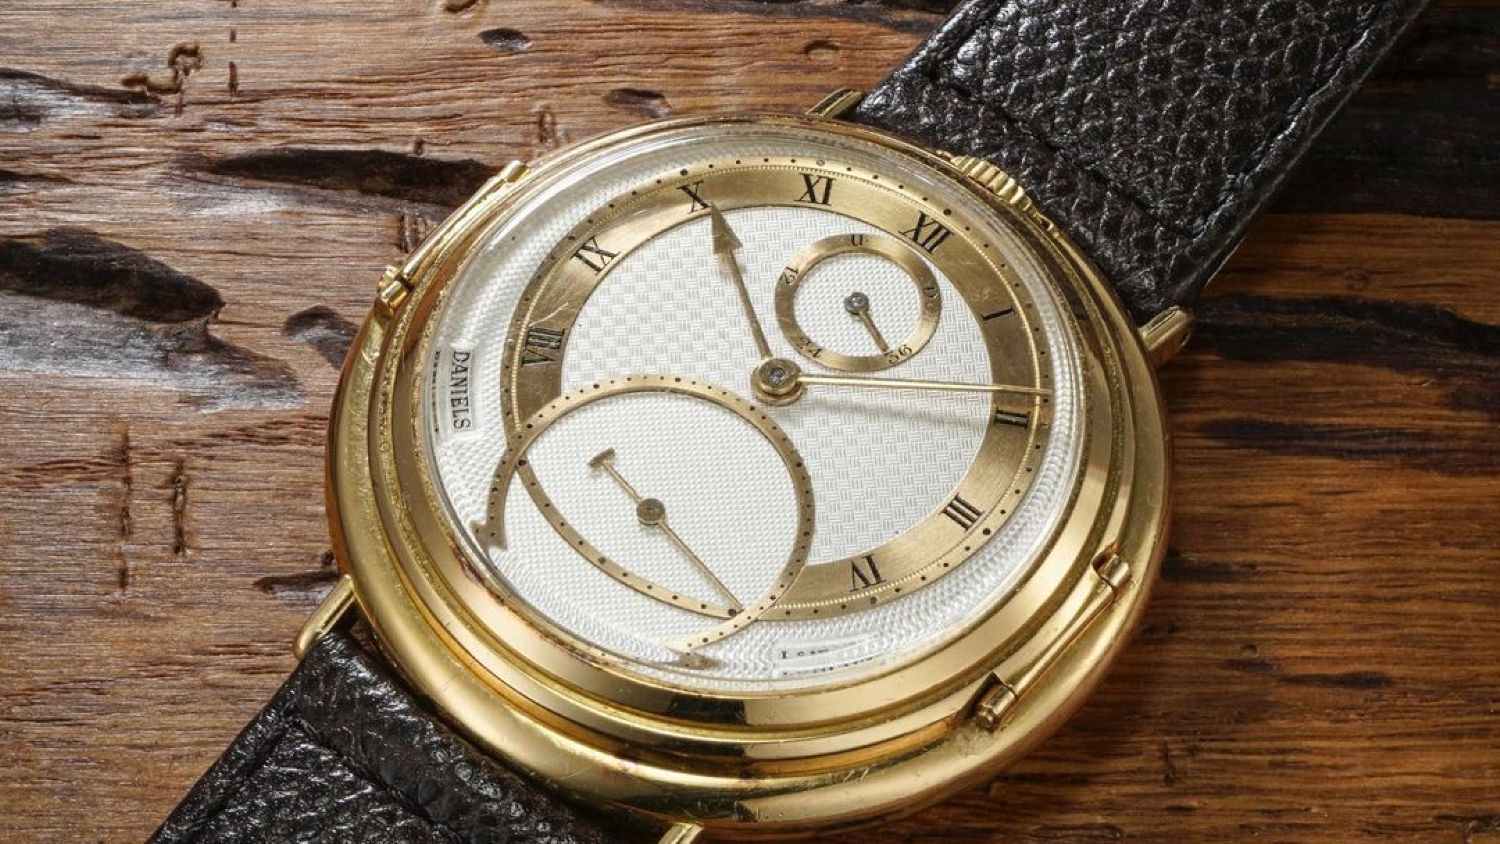 George Daniels wristwatch auctioned for an astounding $4 million